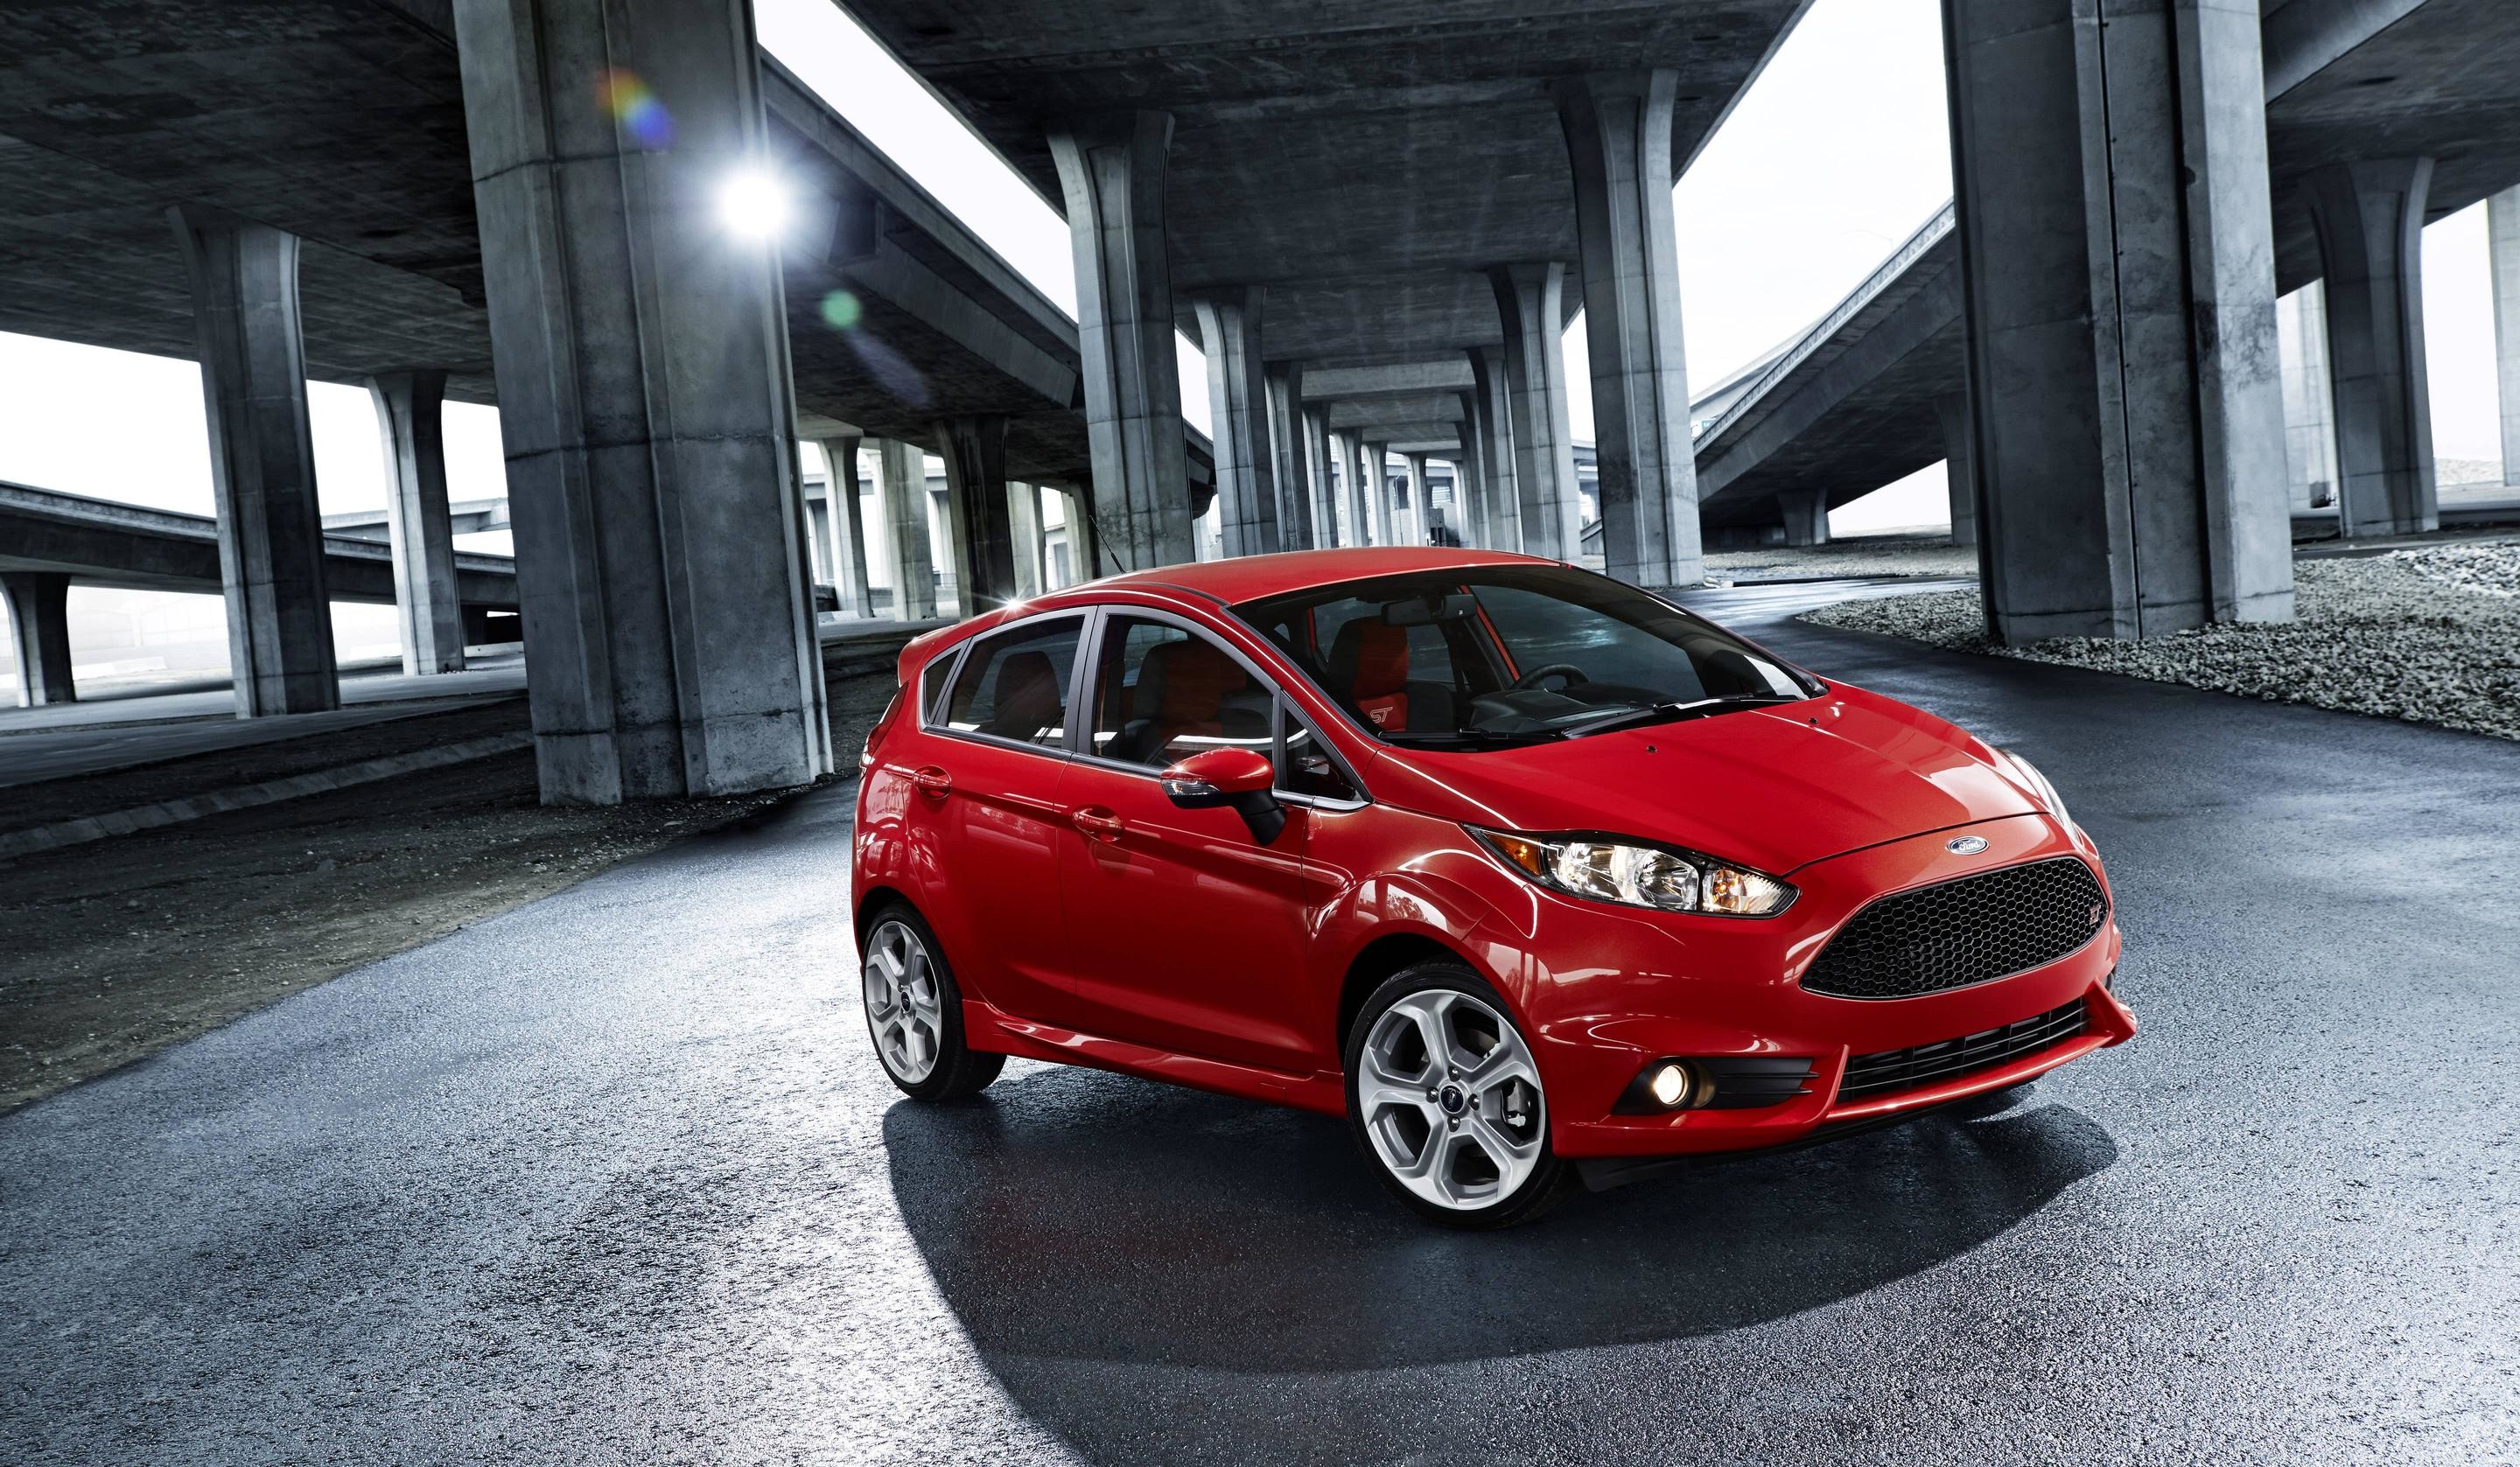 2880x1677 Ford : 2016 Ford Fiesta St Color Red Exterior Front View Wallpaper .